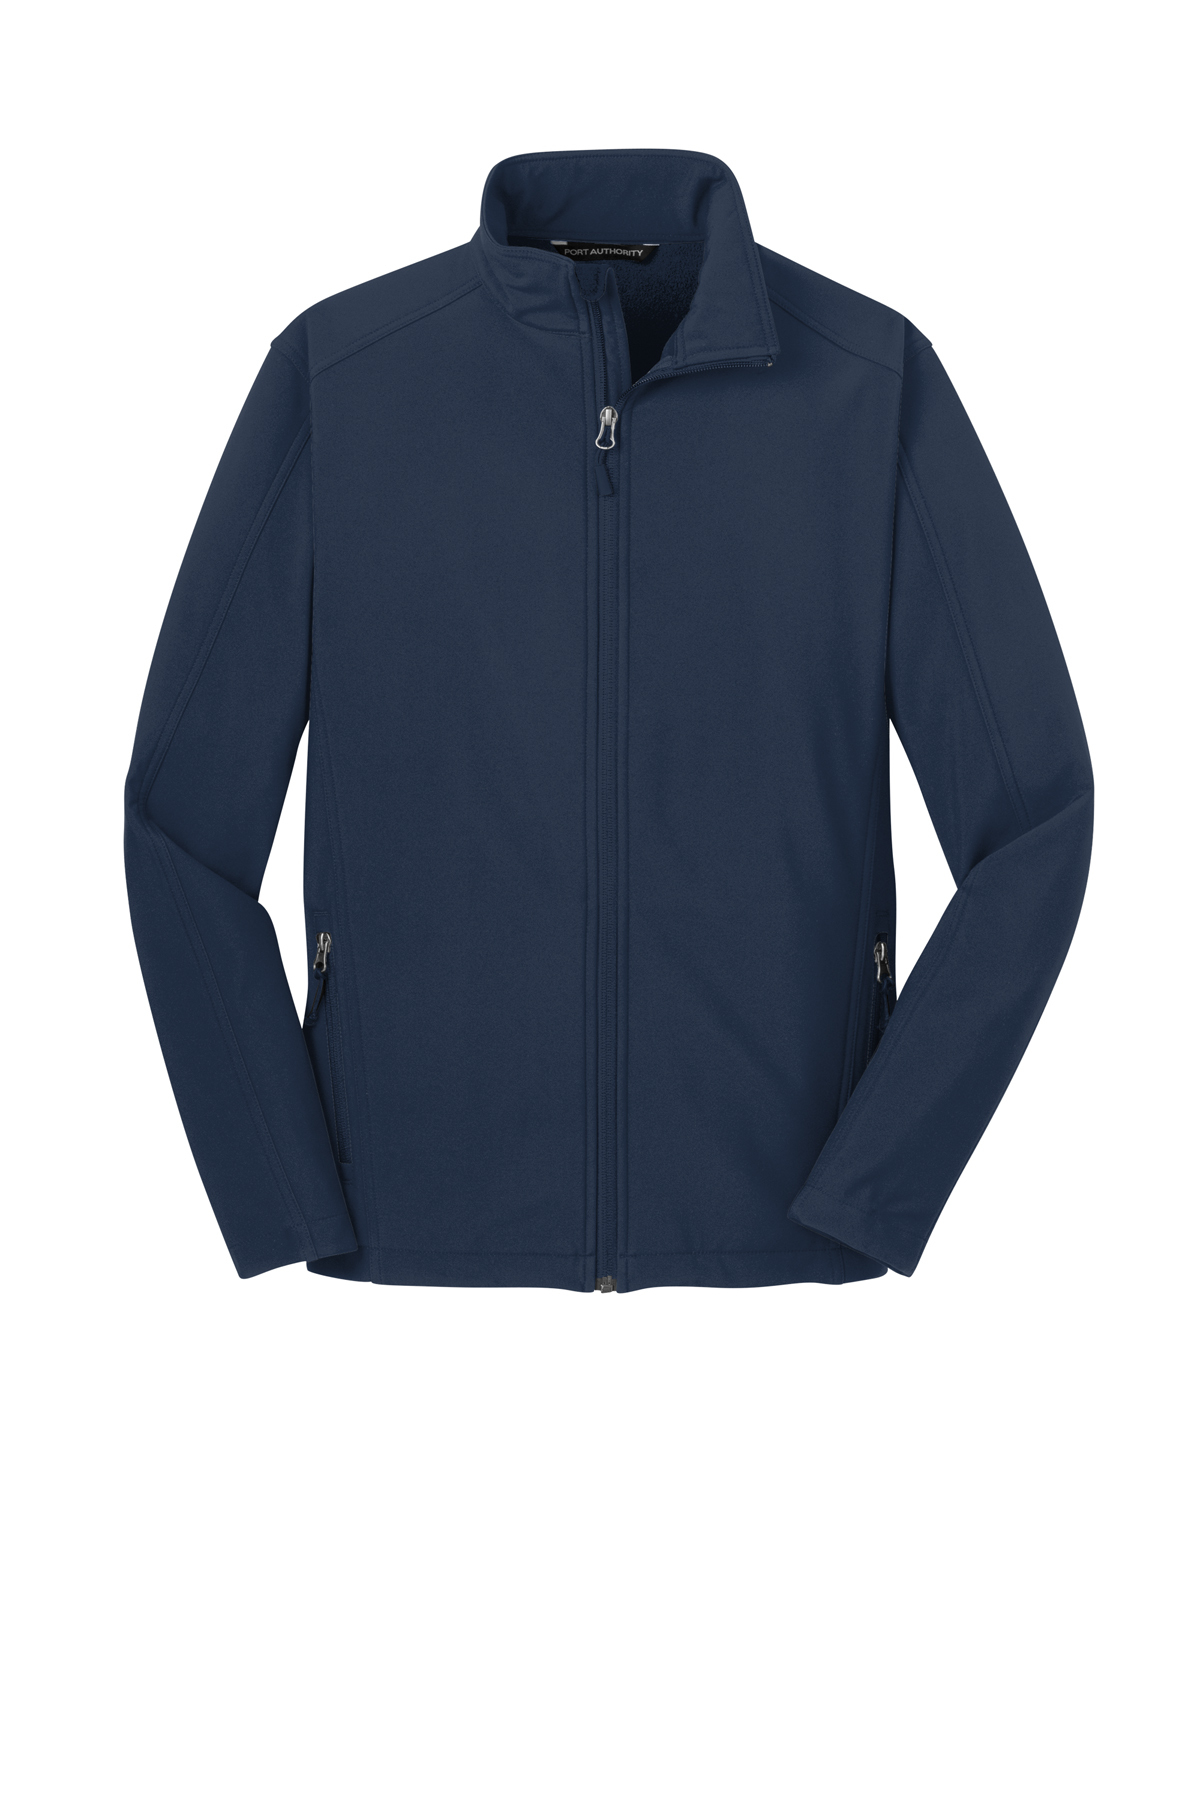 Port Authority Tall Core Soft Shell Jacket | Product | Company Casuals